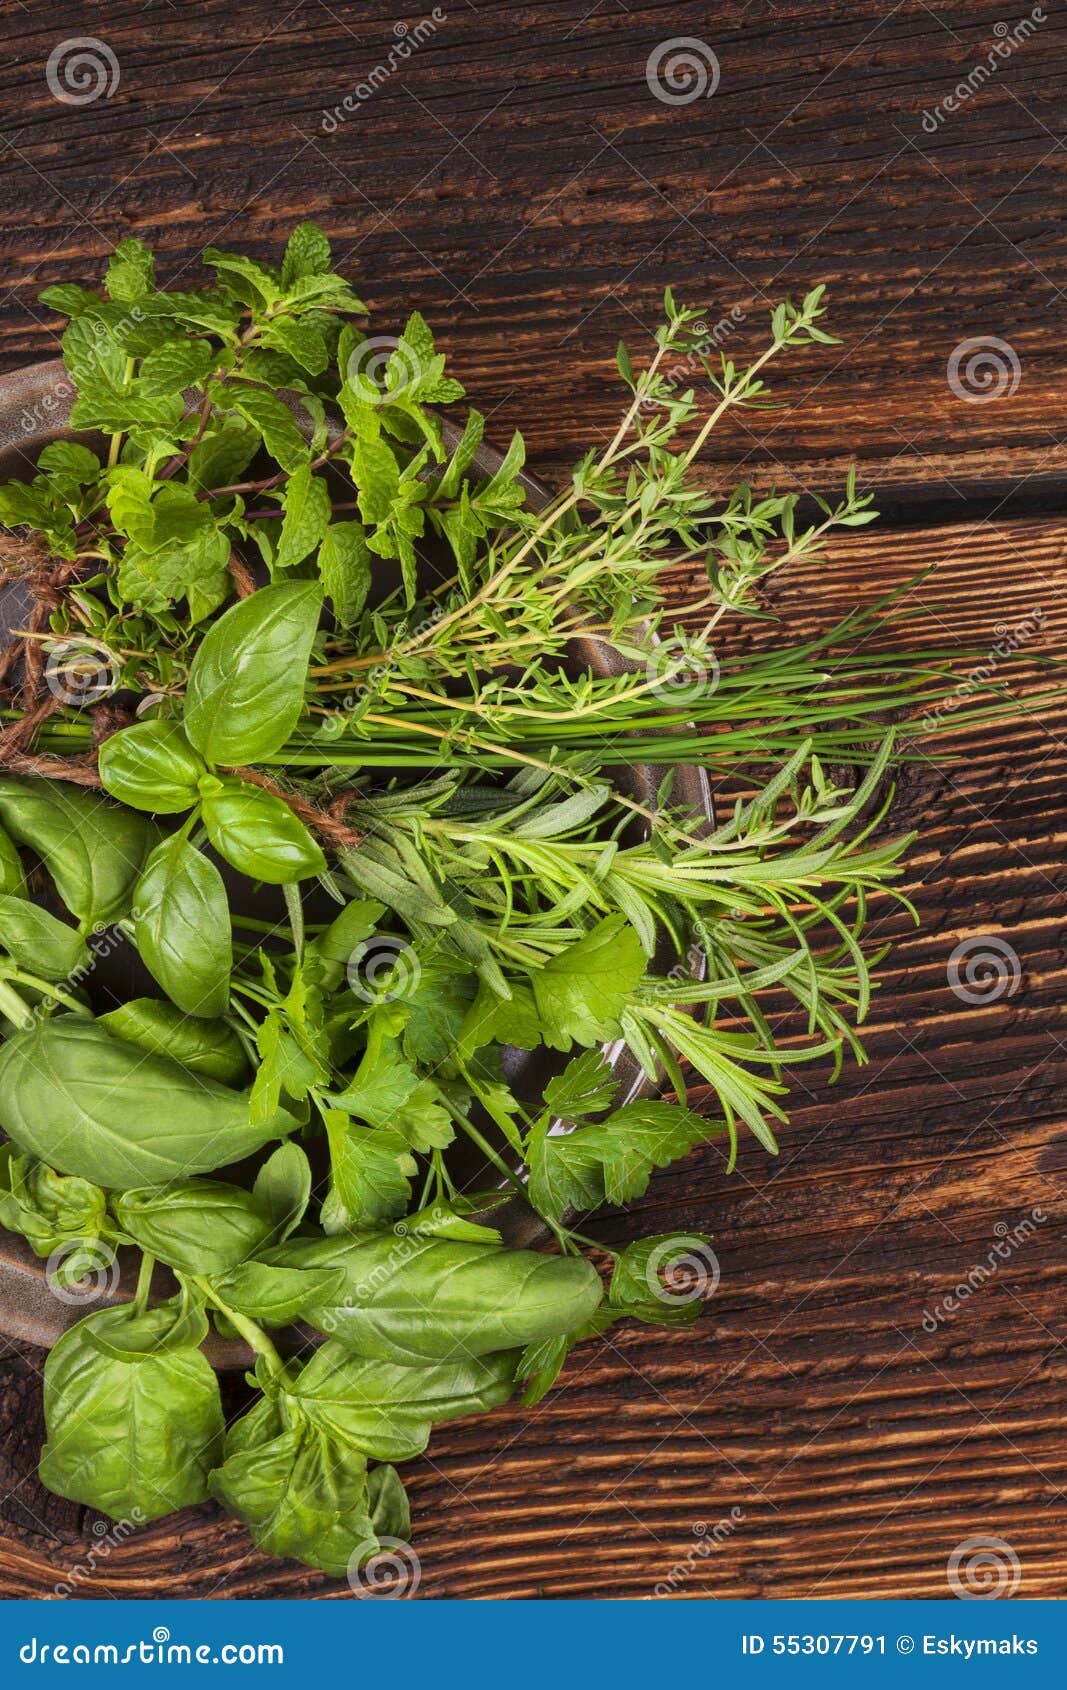 Various Aromatic Culinary Herbs, Rustic Style. Stock Image - Image of ...